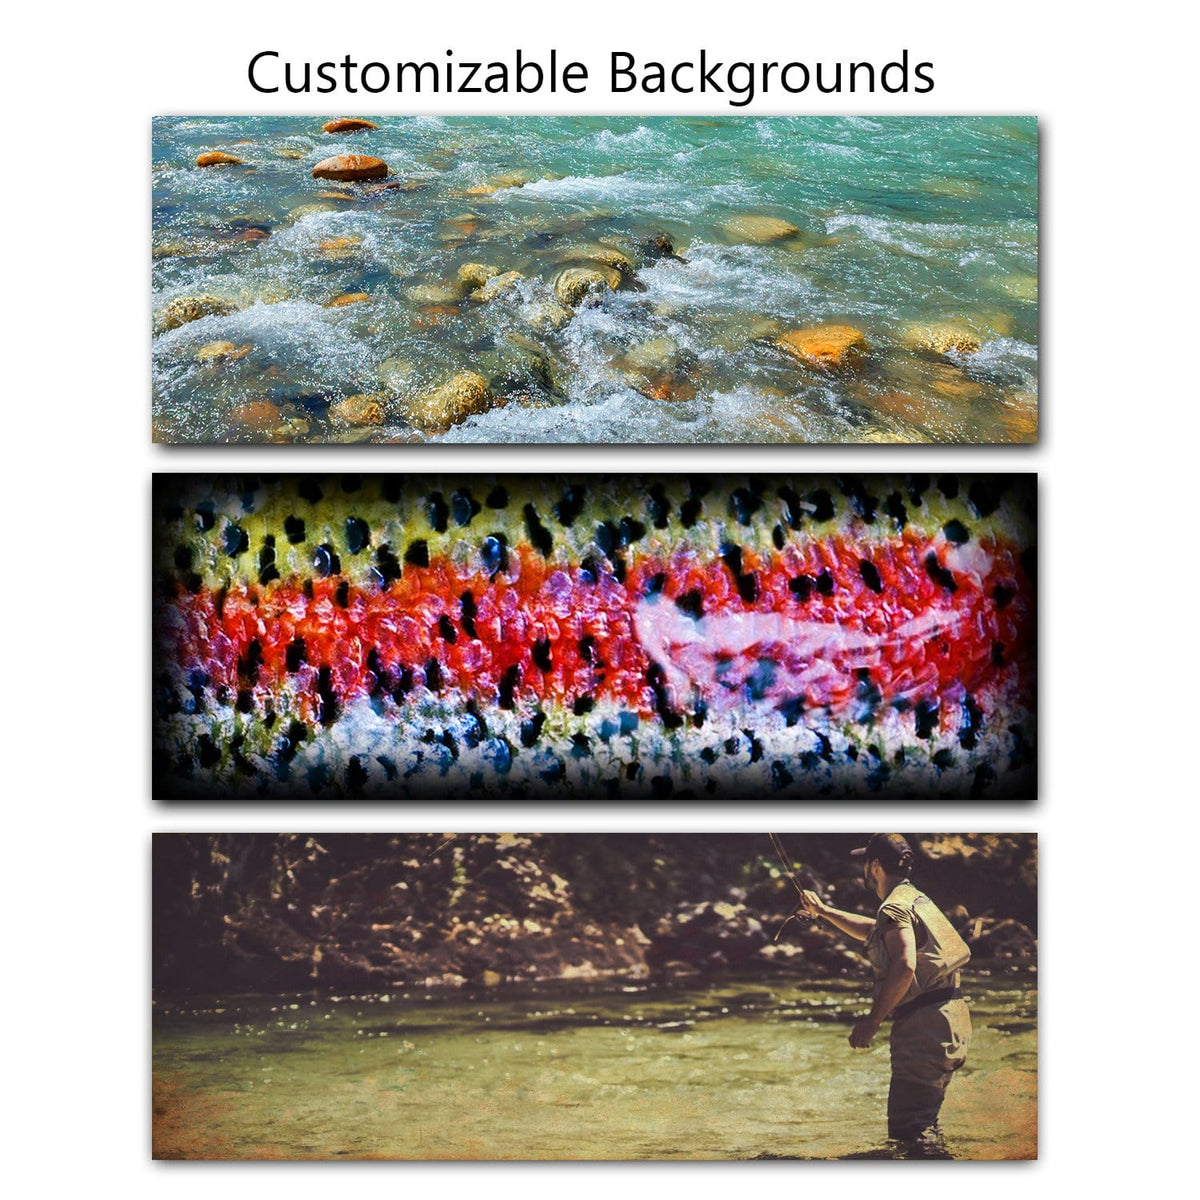 Flyfishing art background options from Personal Prints